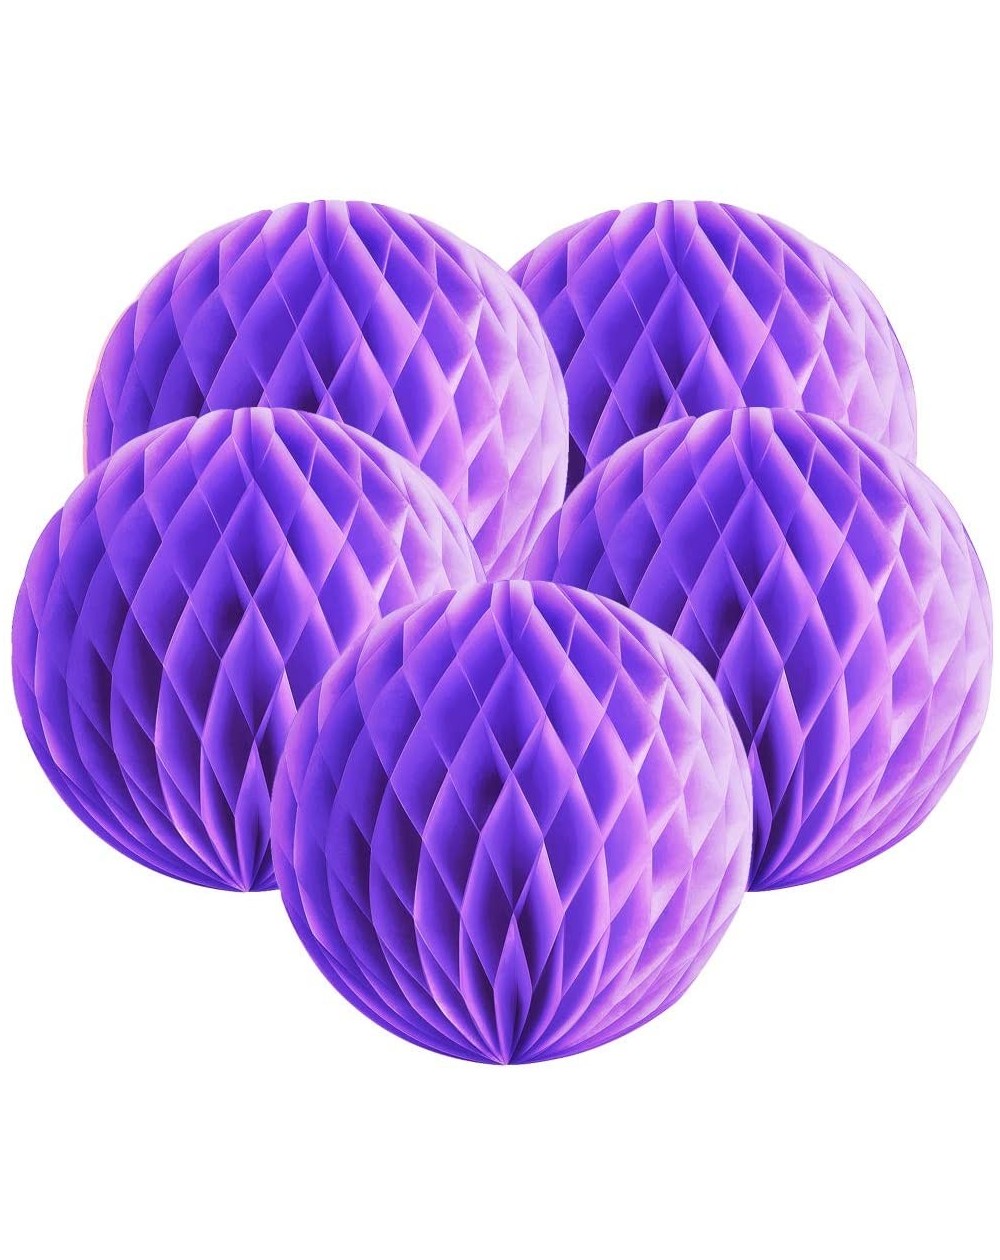 Tissue Pom Poms 5 Pcs Honeycomb Ball 8 inch Tissue Paper Decorations for Wedding- Party- Birthday- Baby Shower - Light Purple...